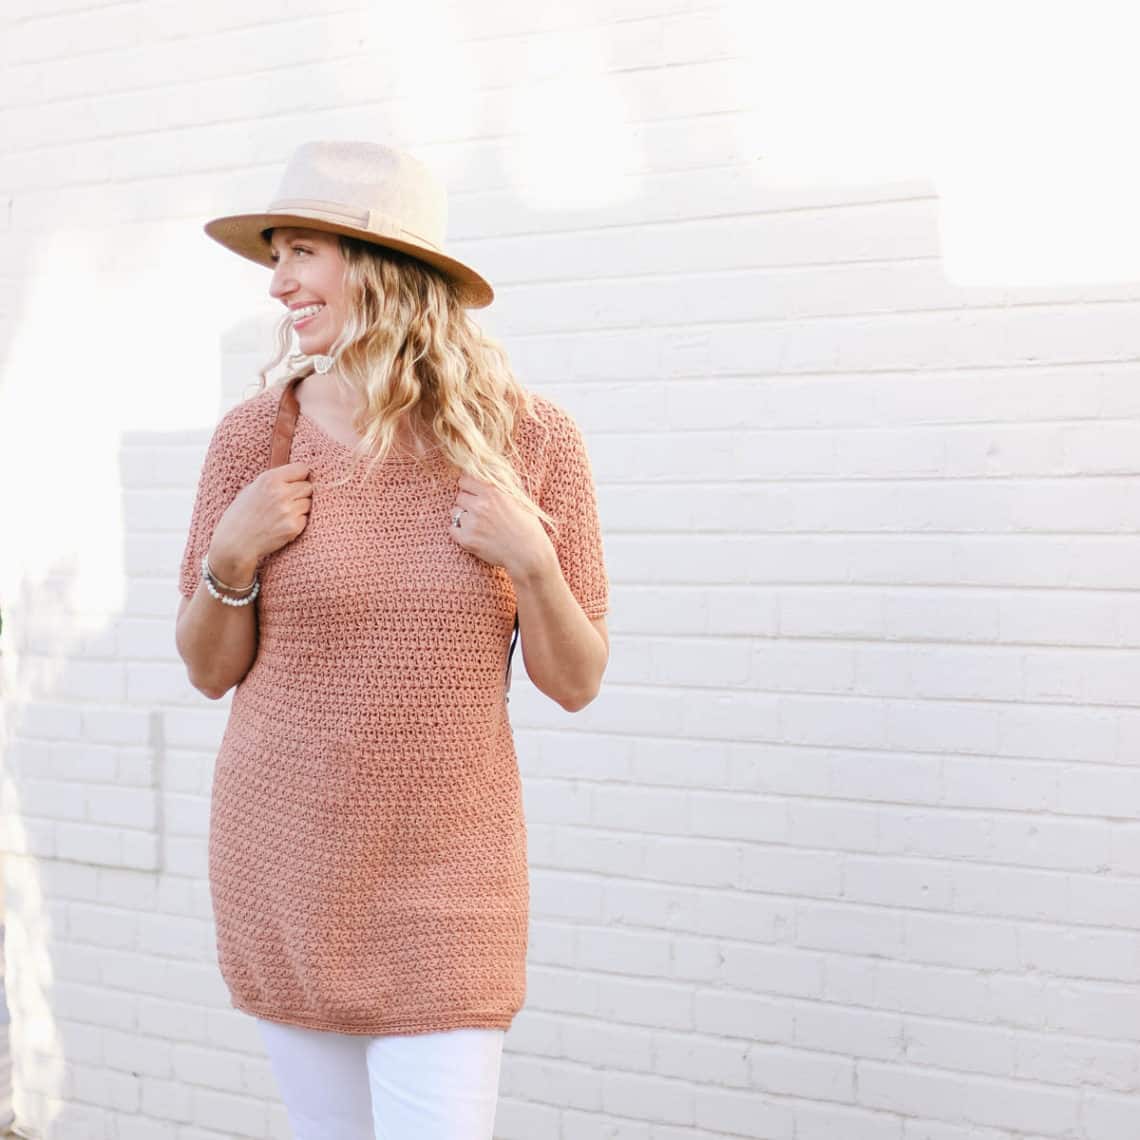 This image shows a woman standing with her arms crossed in front of a white brick wall. Her body is facing the camera and she is looking over her shoulder. She is wearing a mauve colored crochet tunic, white pants and a tan hat.